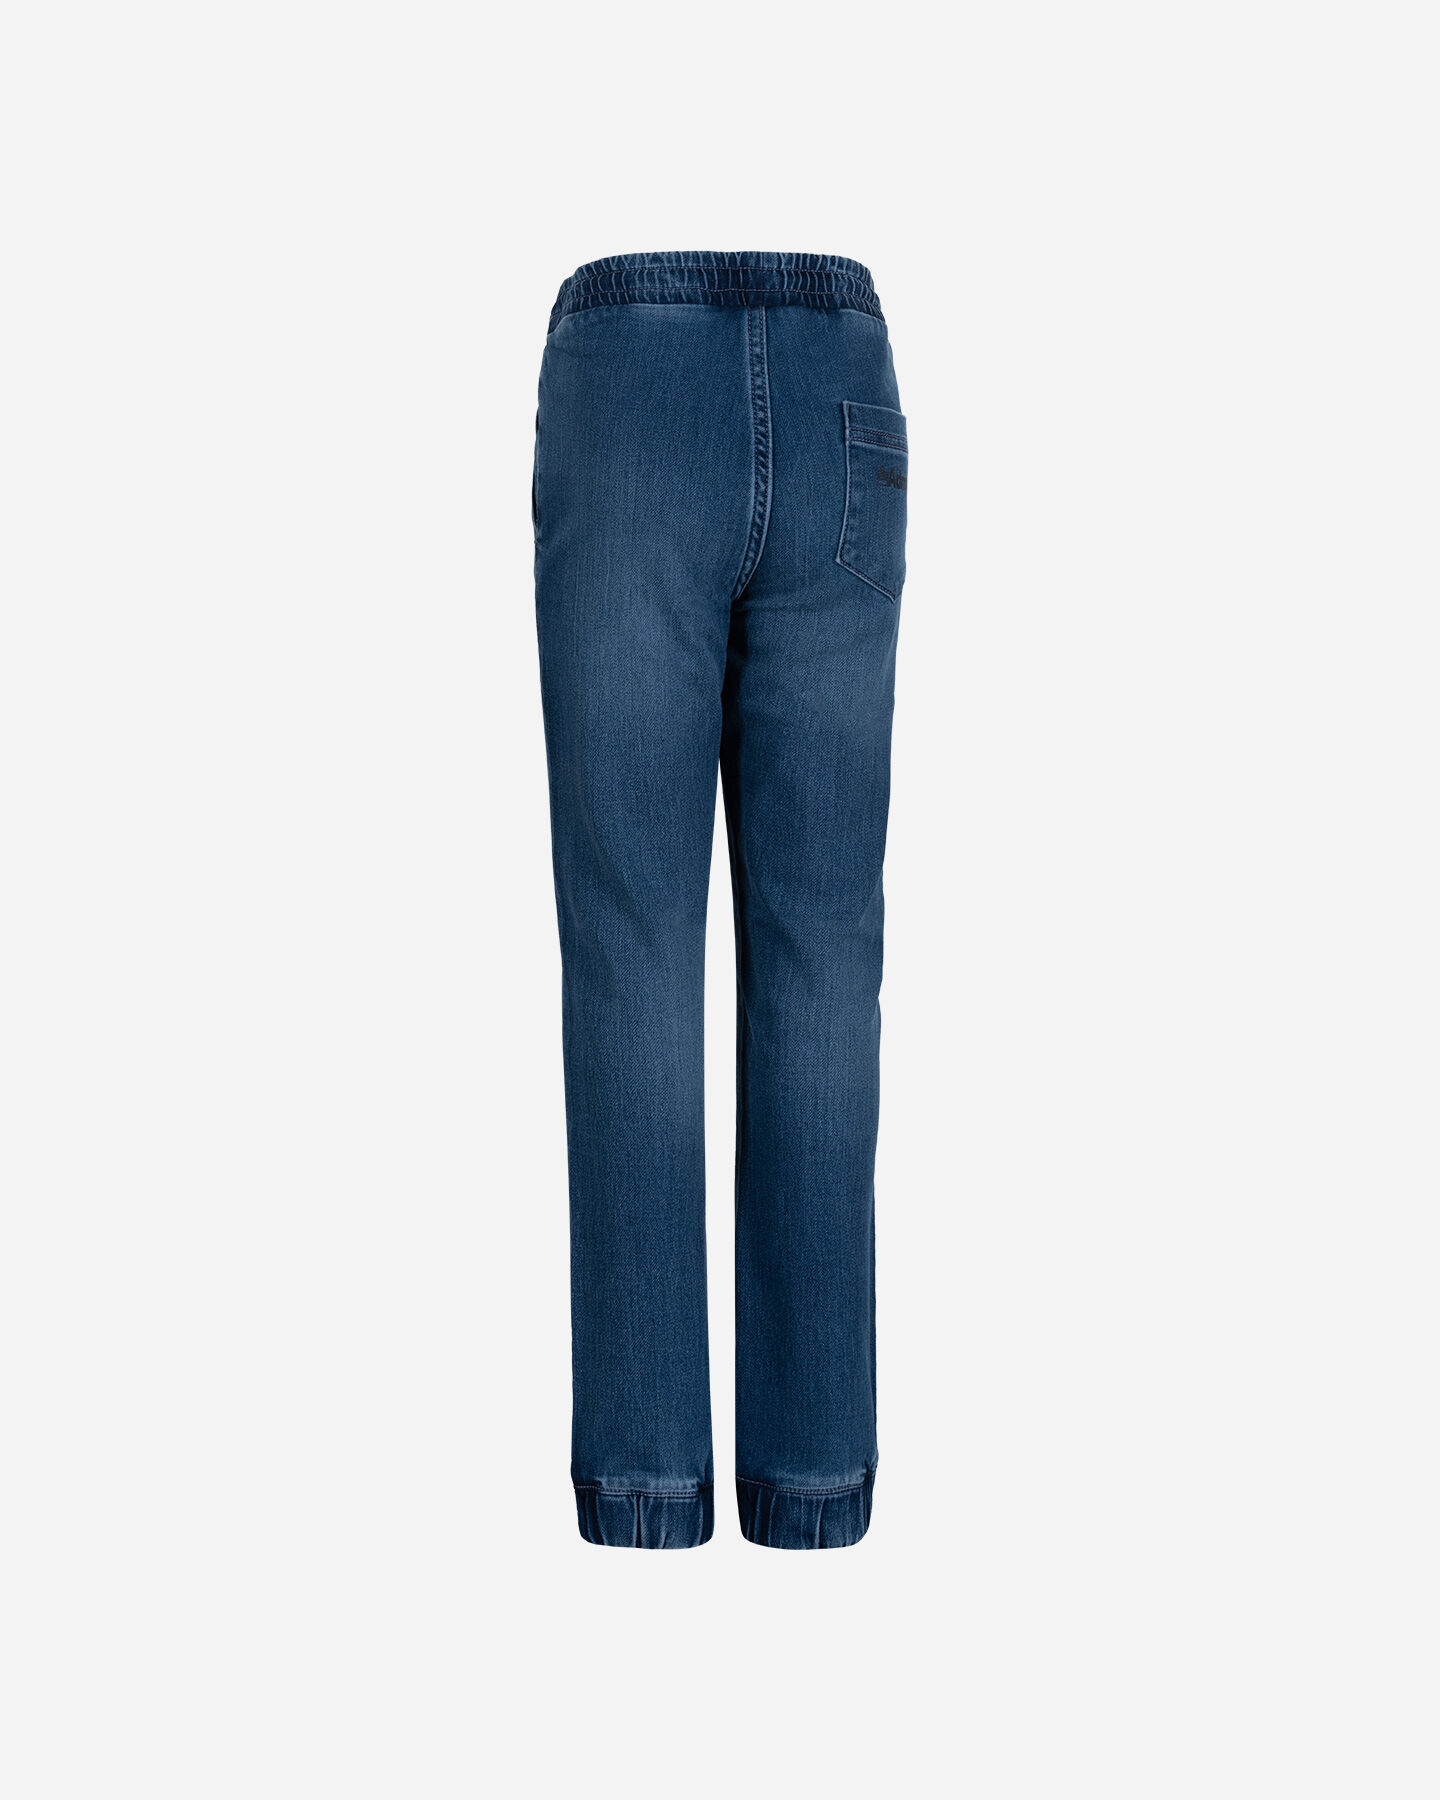  Jeans ADMIRAL COLLEGE BTS JR S4125682|MD|4A scatto 1